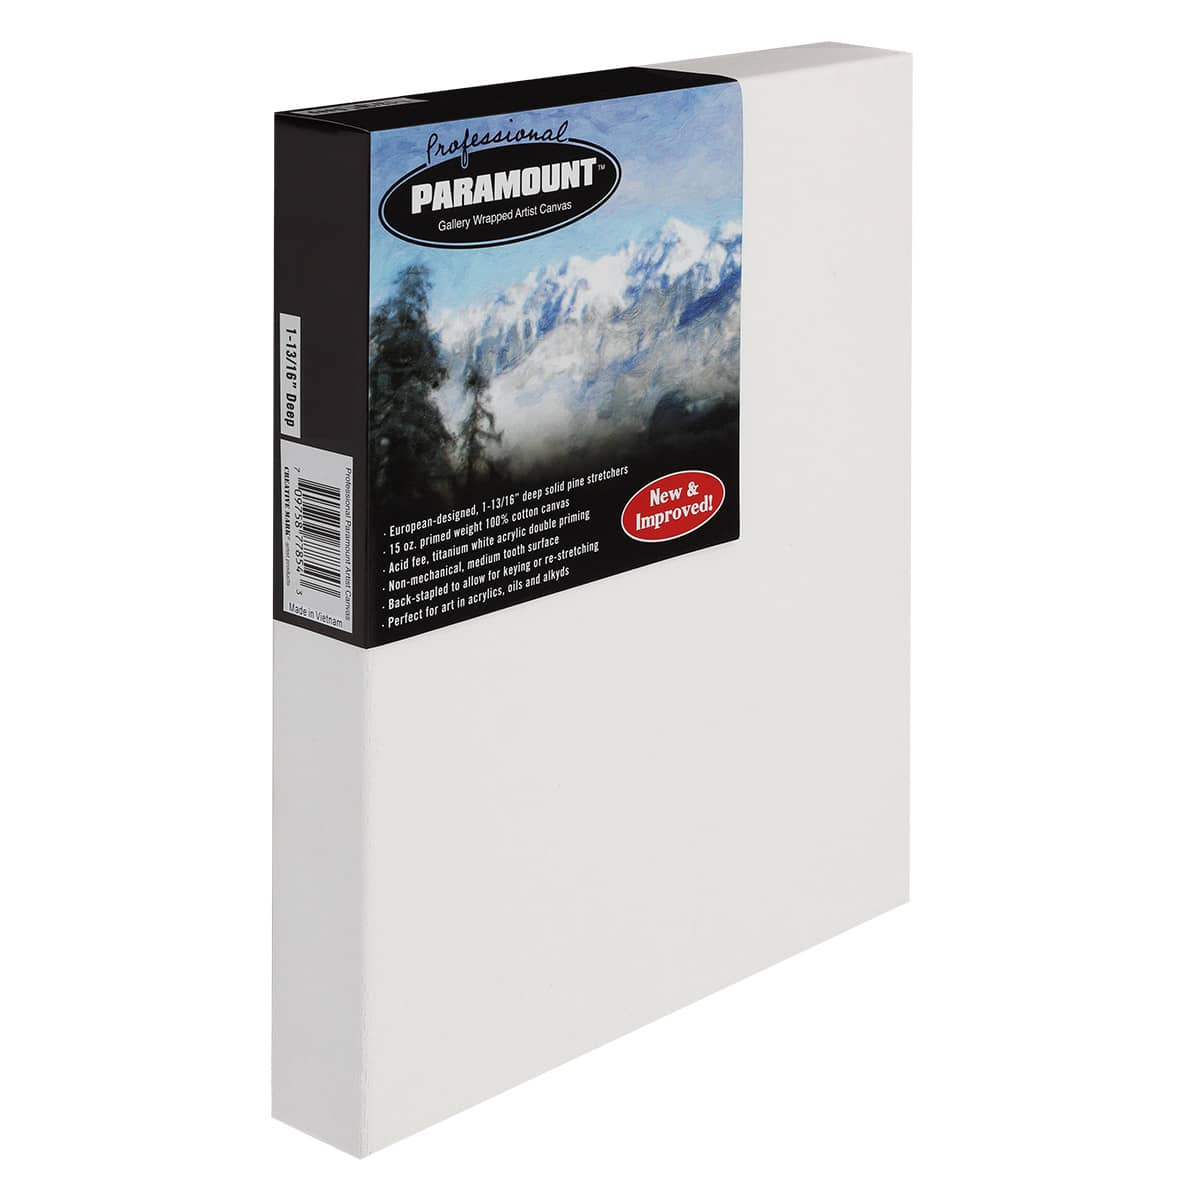 Paramount1-13/16" Professional Gallery Wrap Canvas - 16x20" Deep Box Of 3